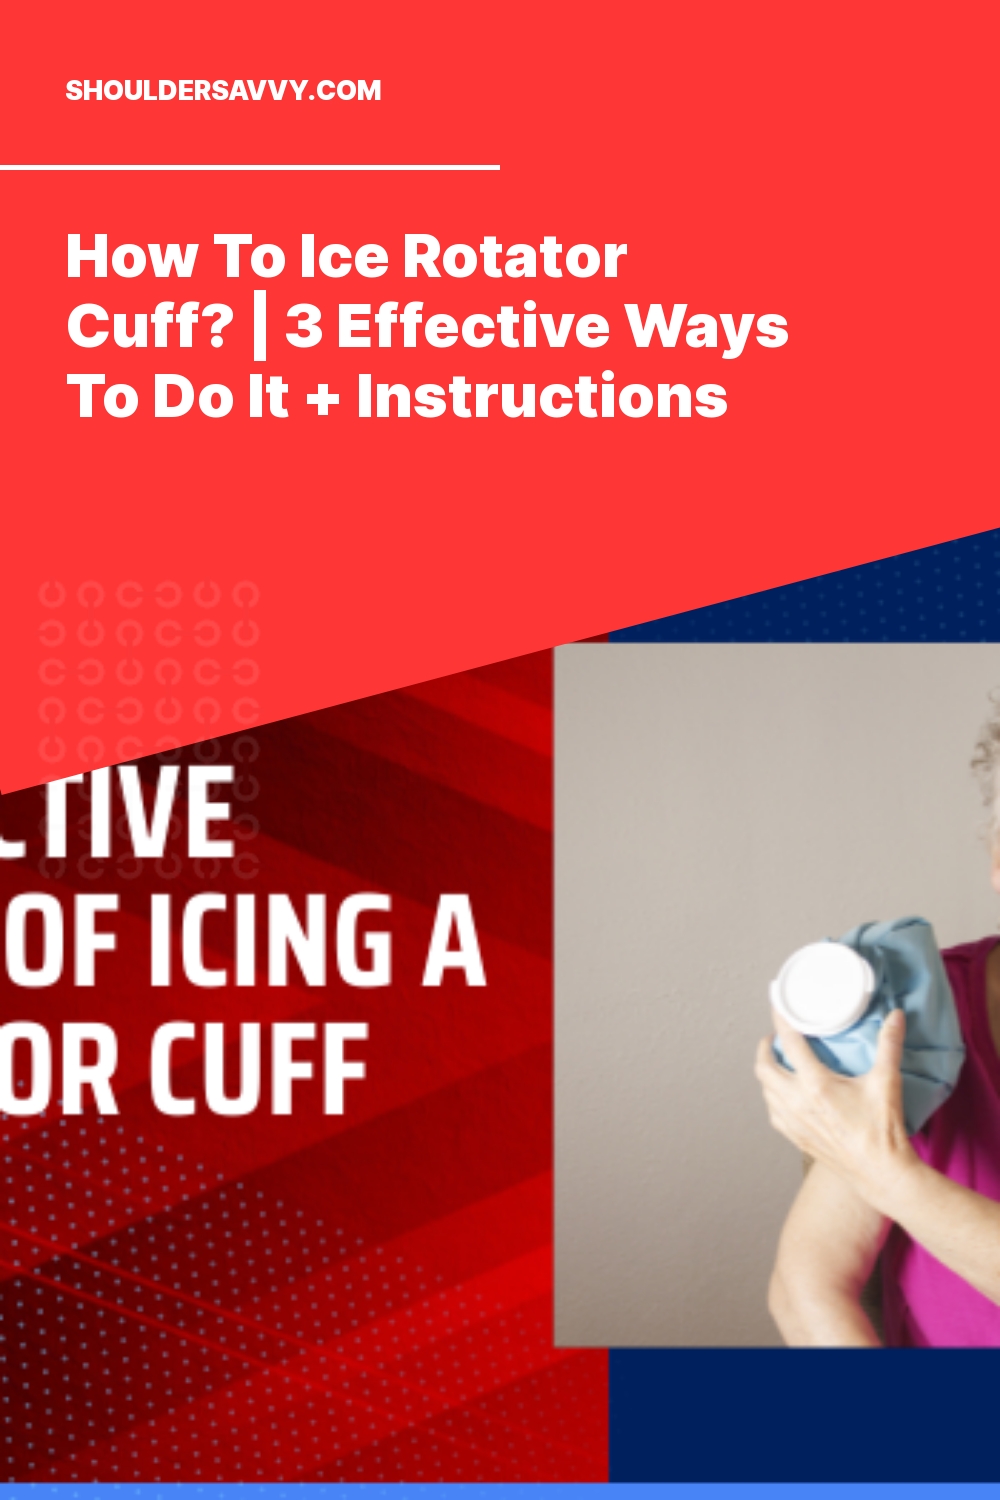 How To Ice Rotator Cuff? | 3 Effective Ways To Do It + Instructions